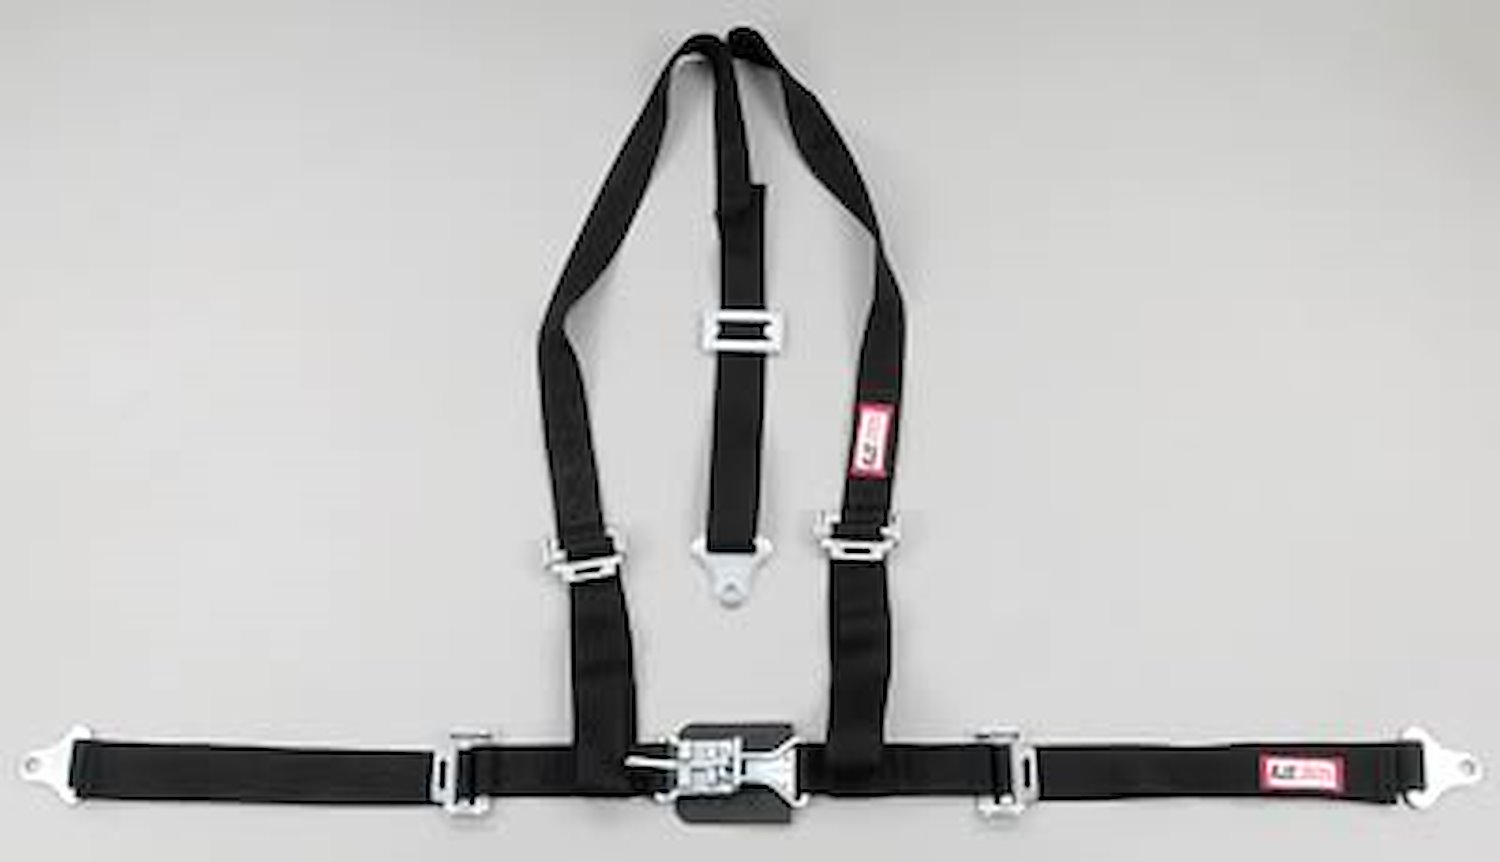 NON-SFI L&L HARNESS 3 PULL UP Lap BELT SEWN IN 2 S.H. Y FLOOR Mount ALL WRAP ENDS ORANGE